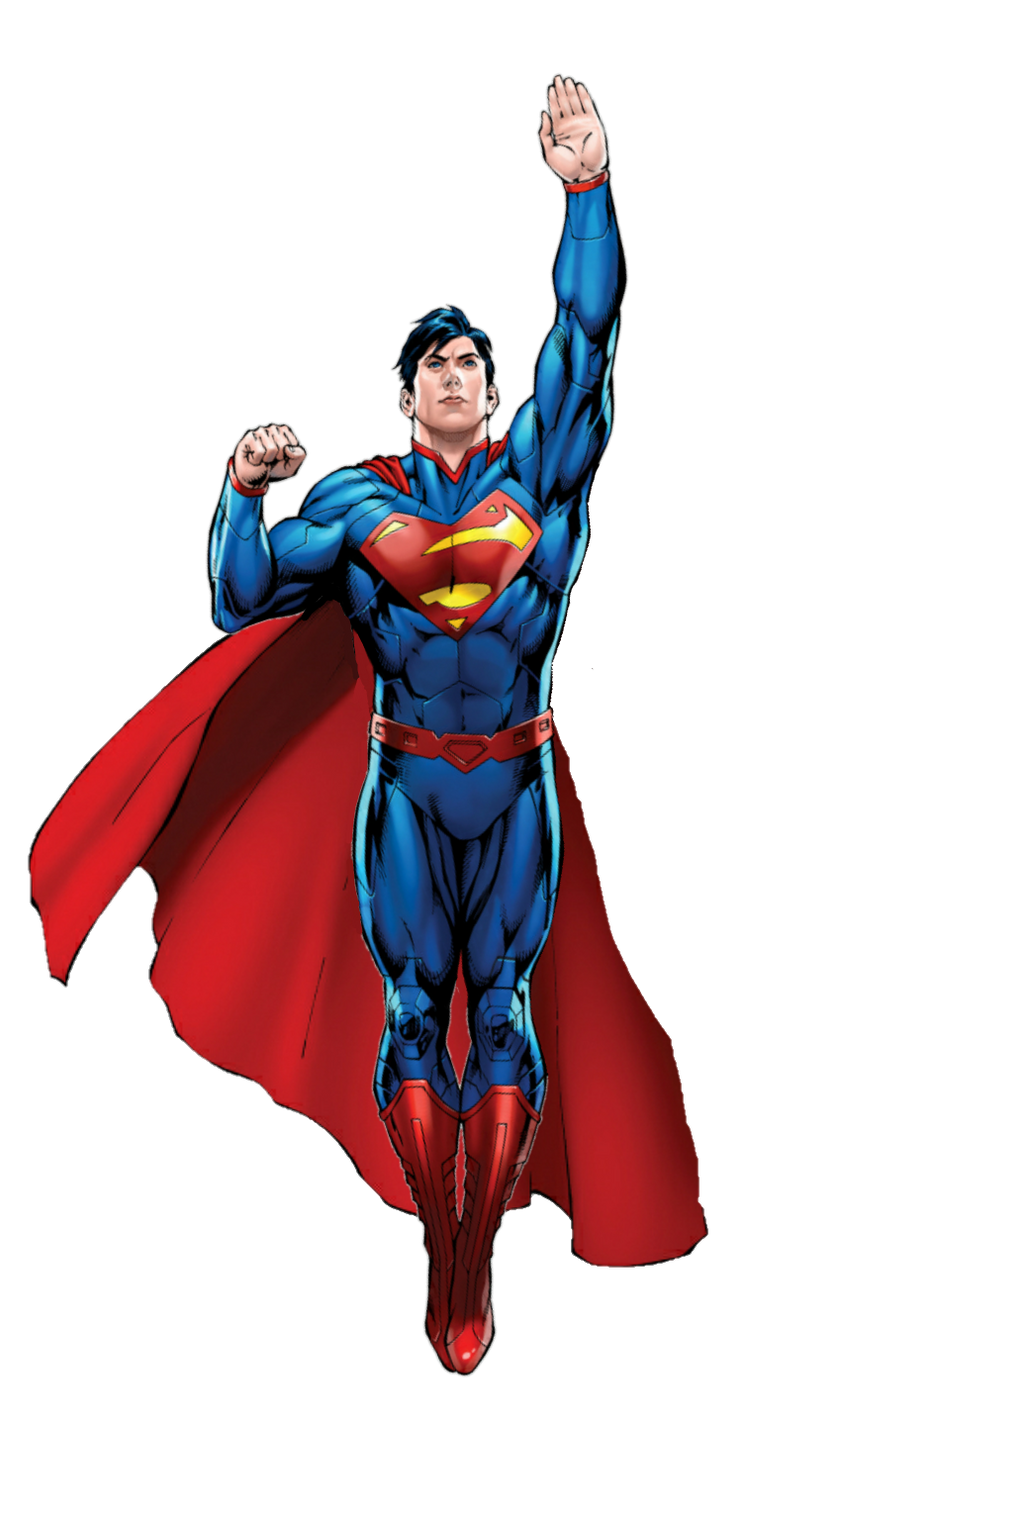 superman flying clipart - photo #46